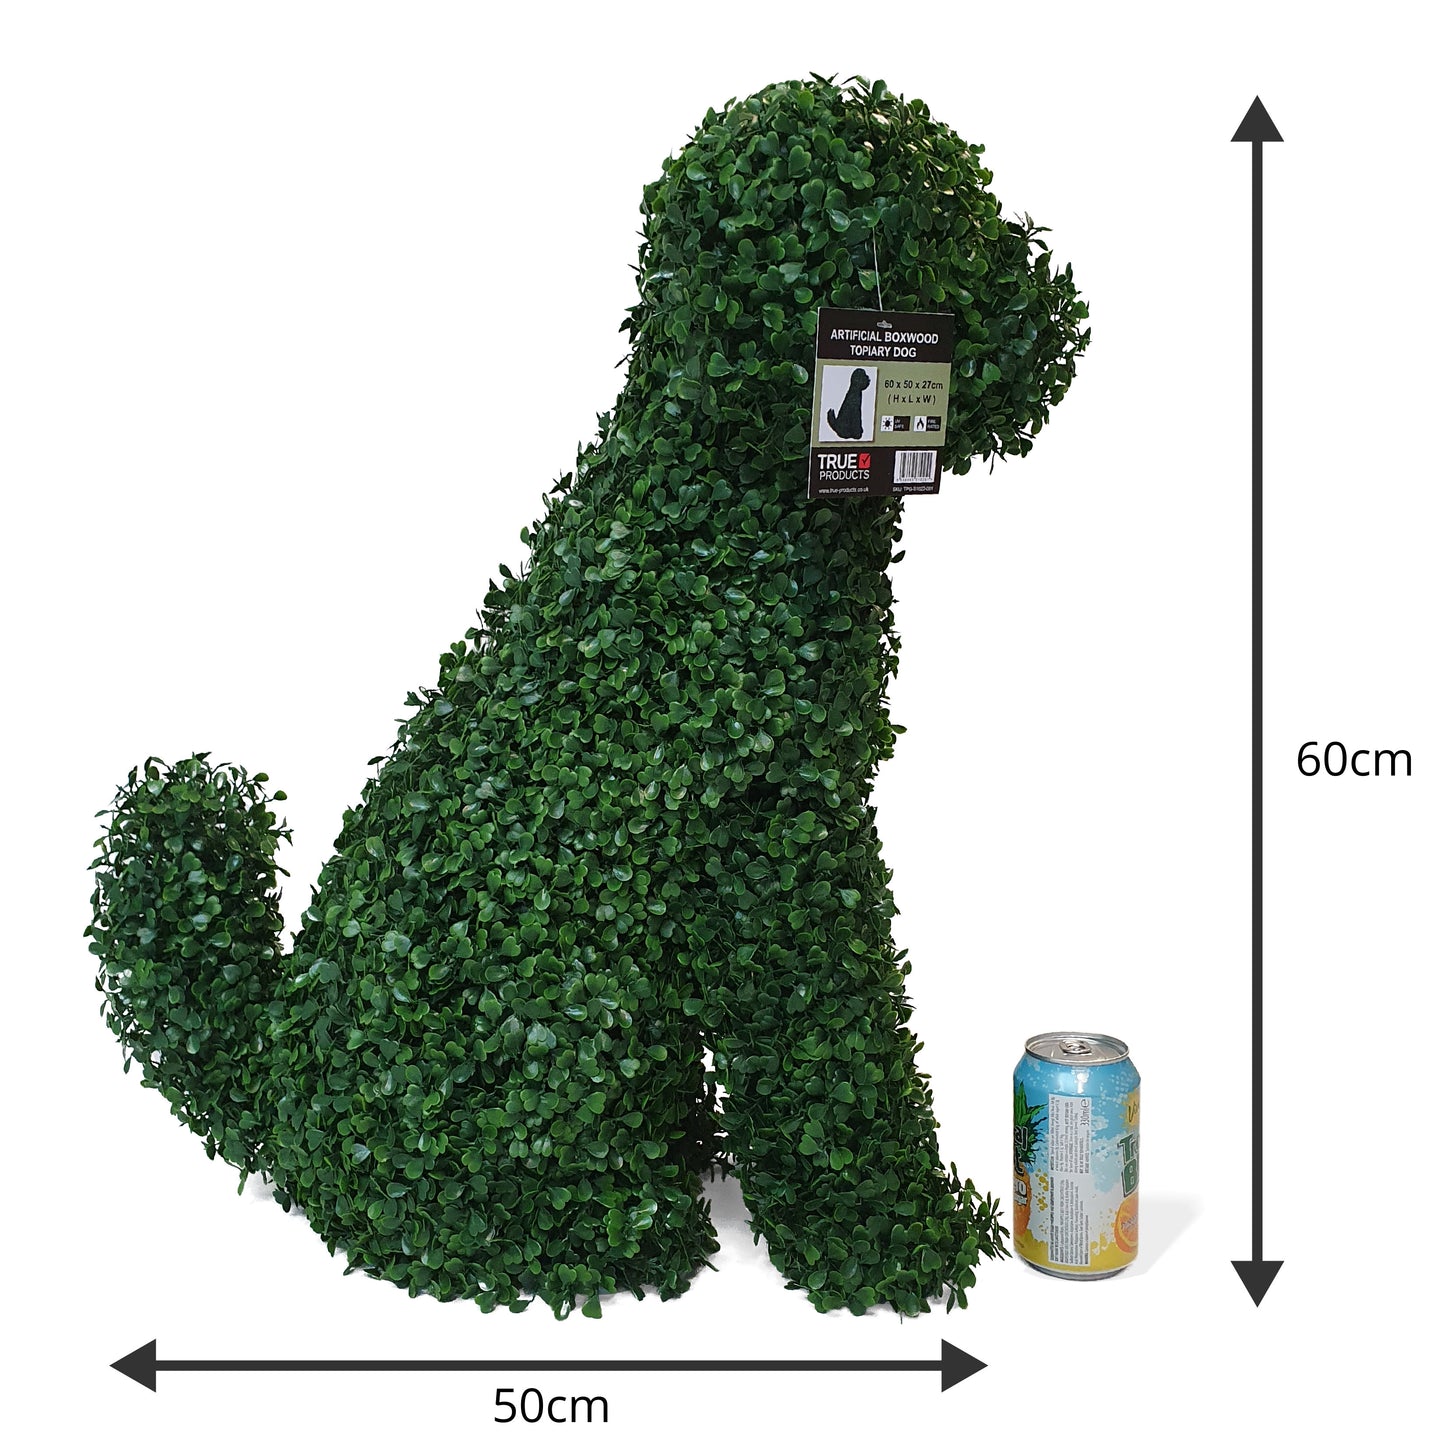 Topiary Dog Artificial Boxwood 60cm